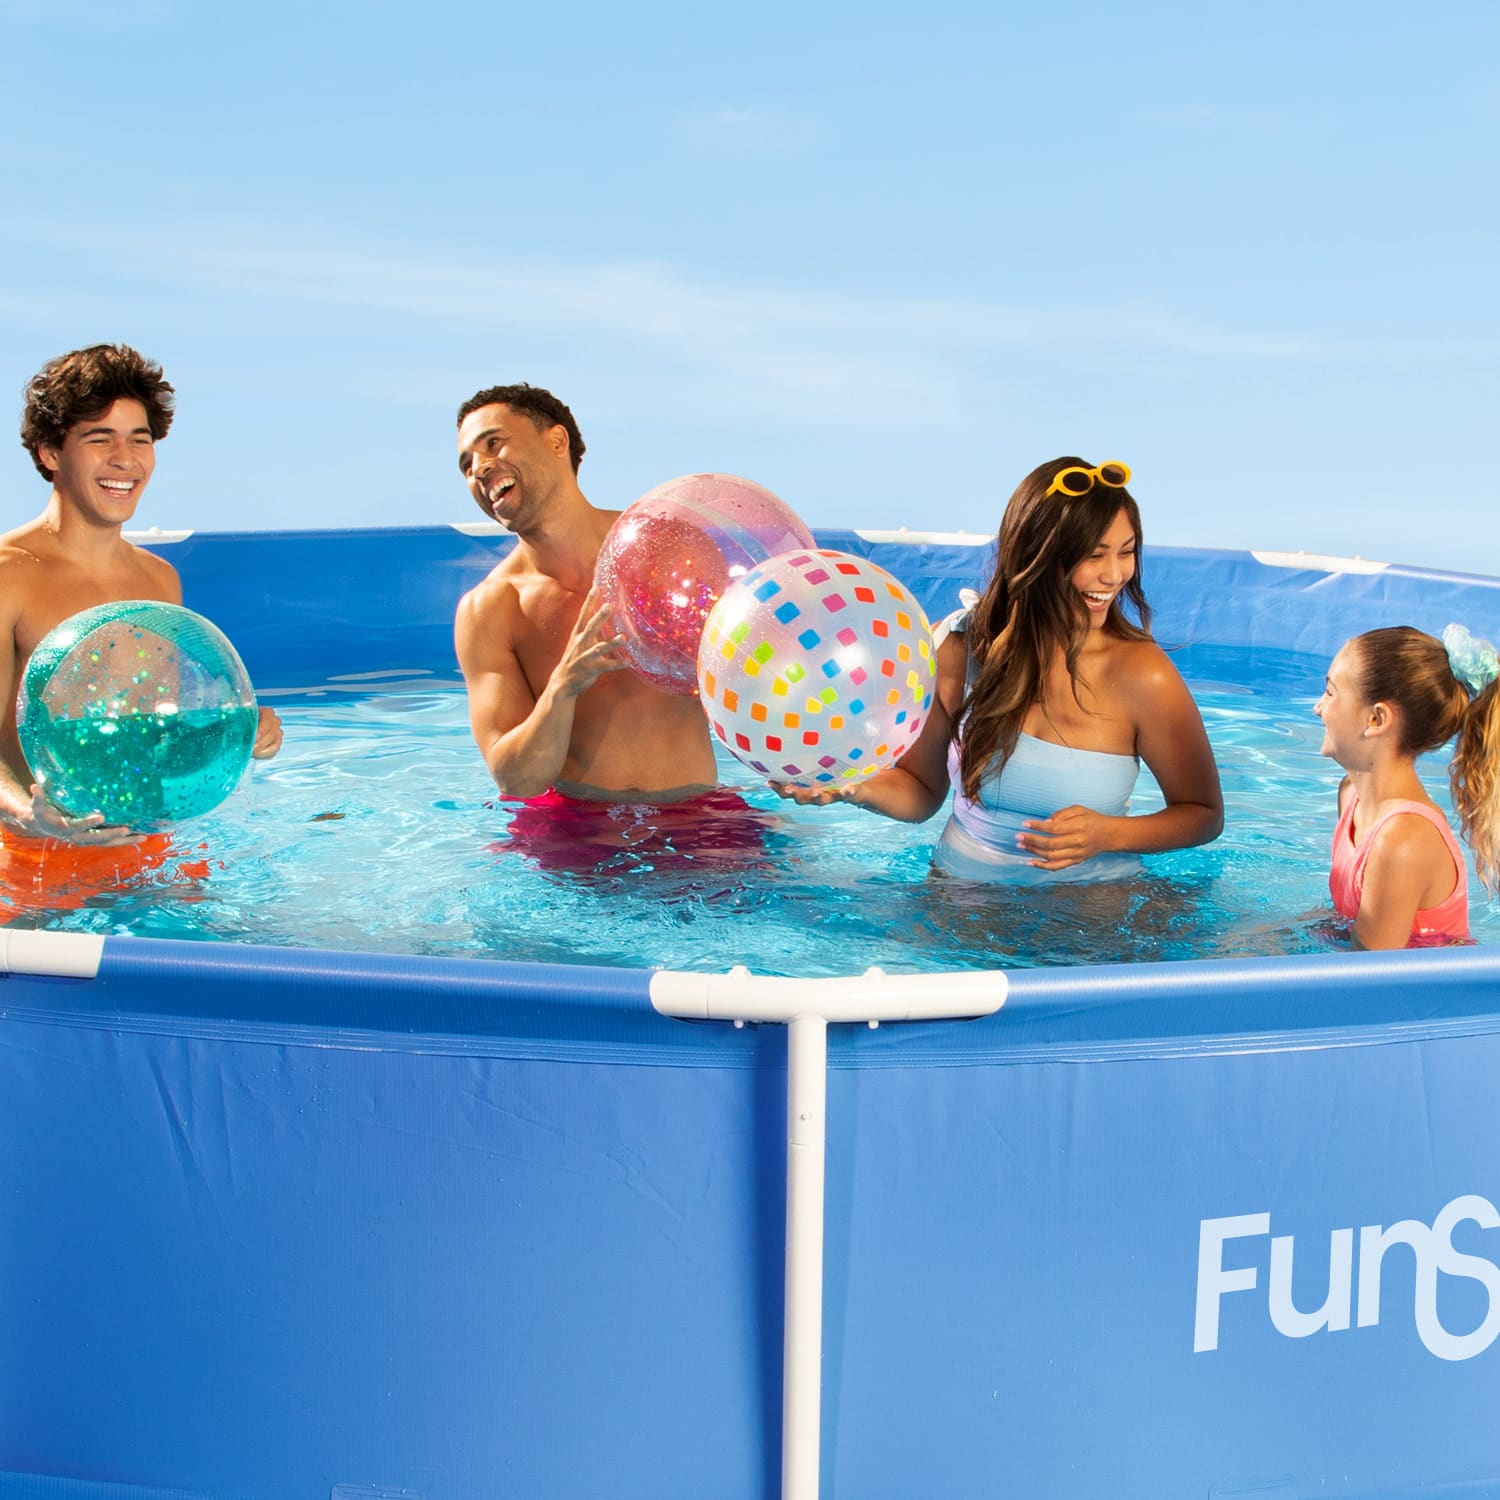 Funsicle 15 ft Activity Pool close up with people